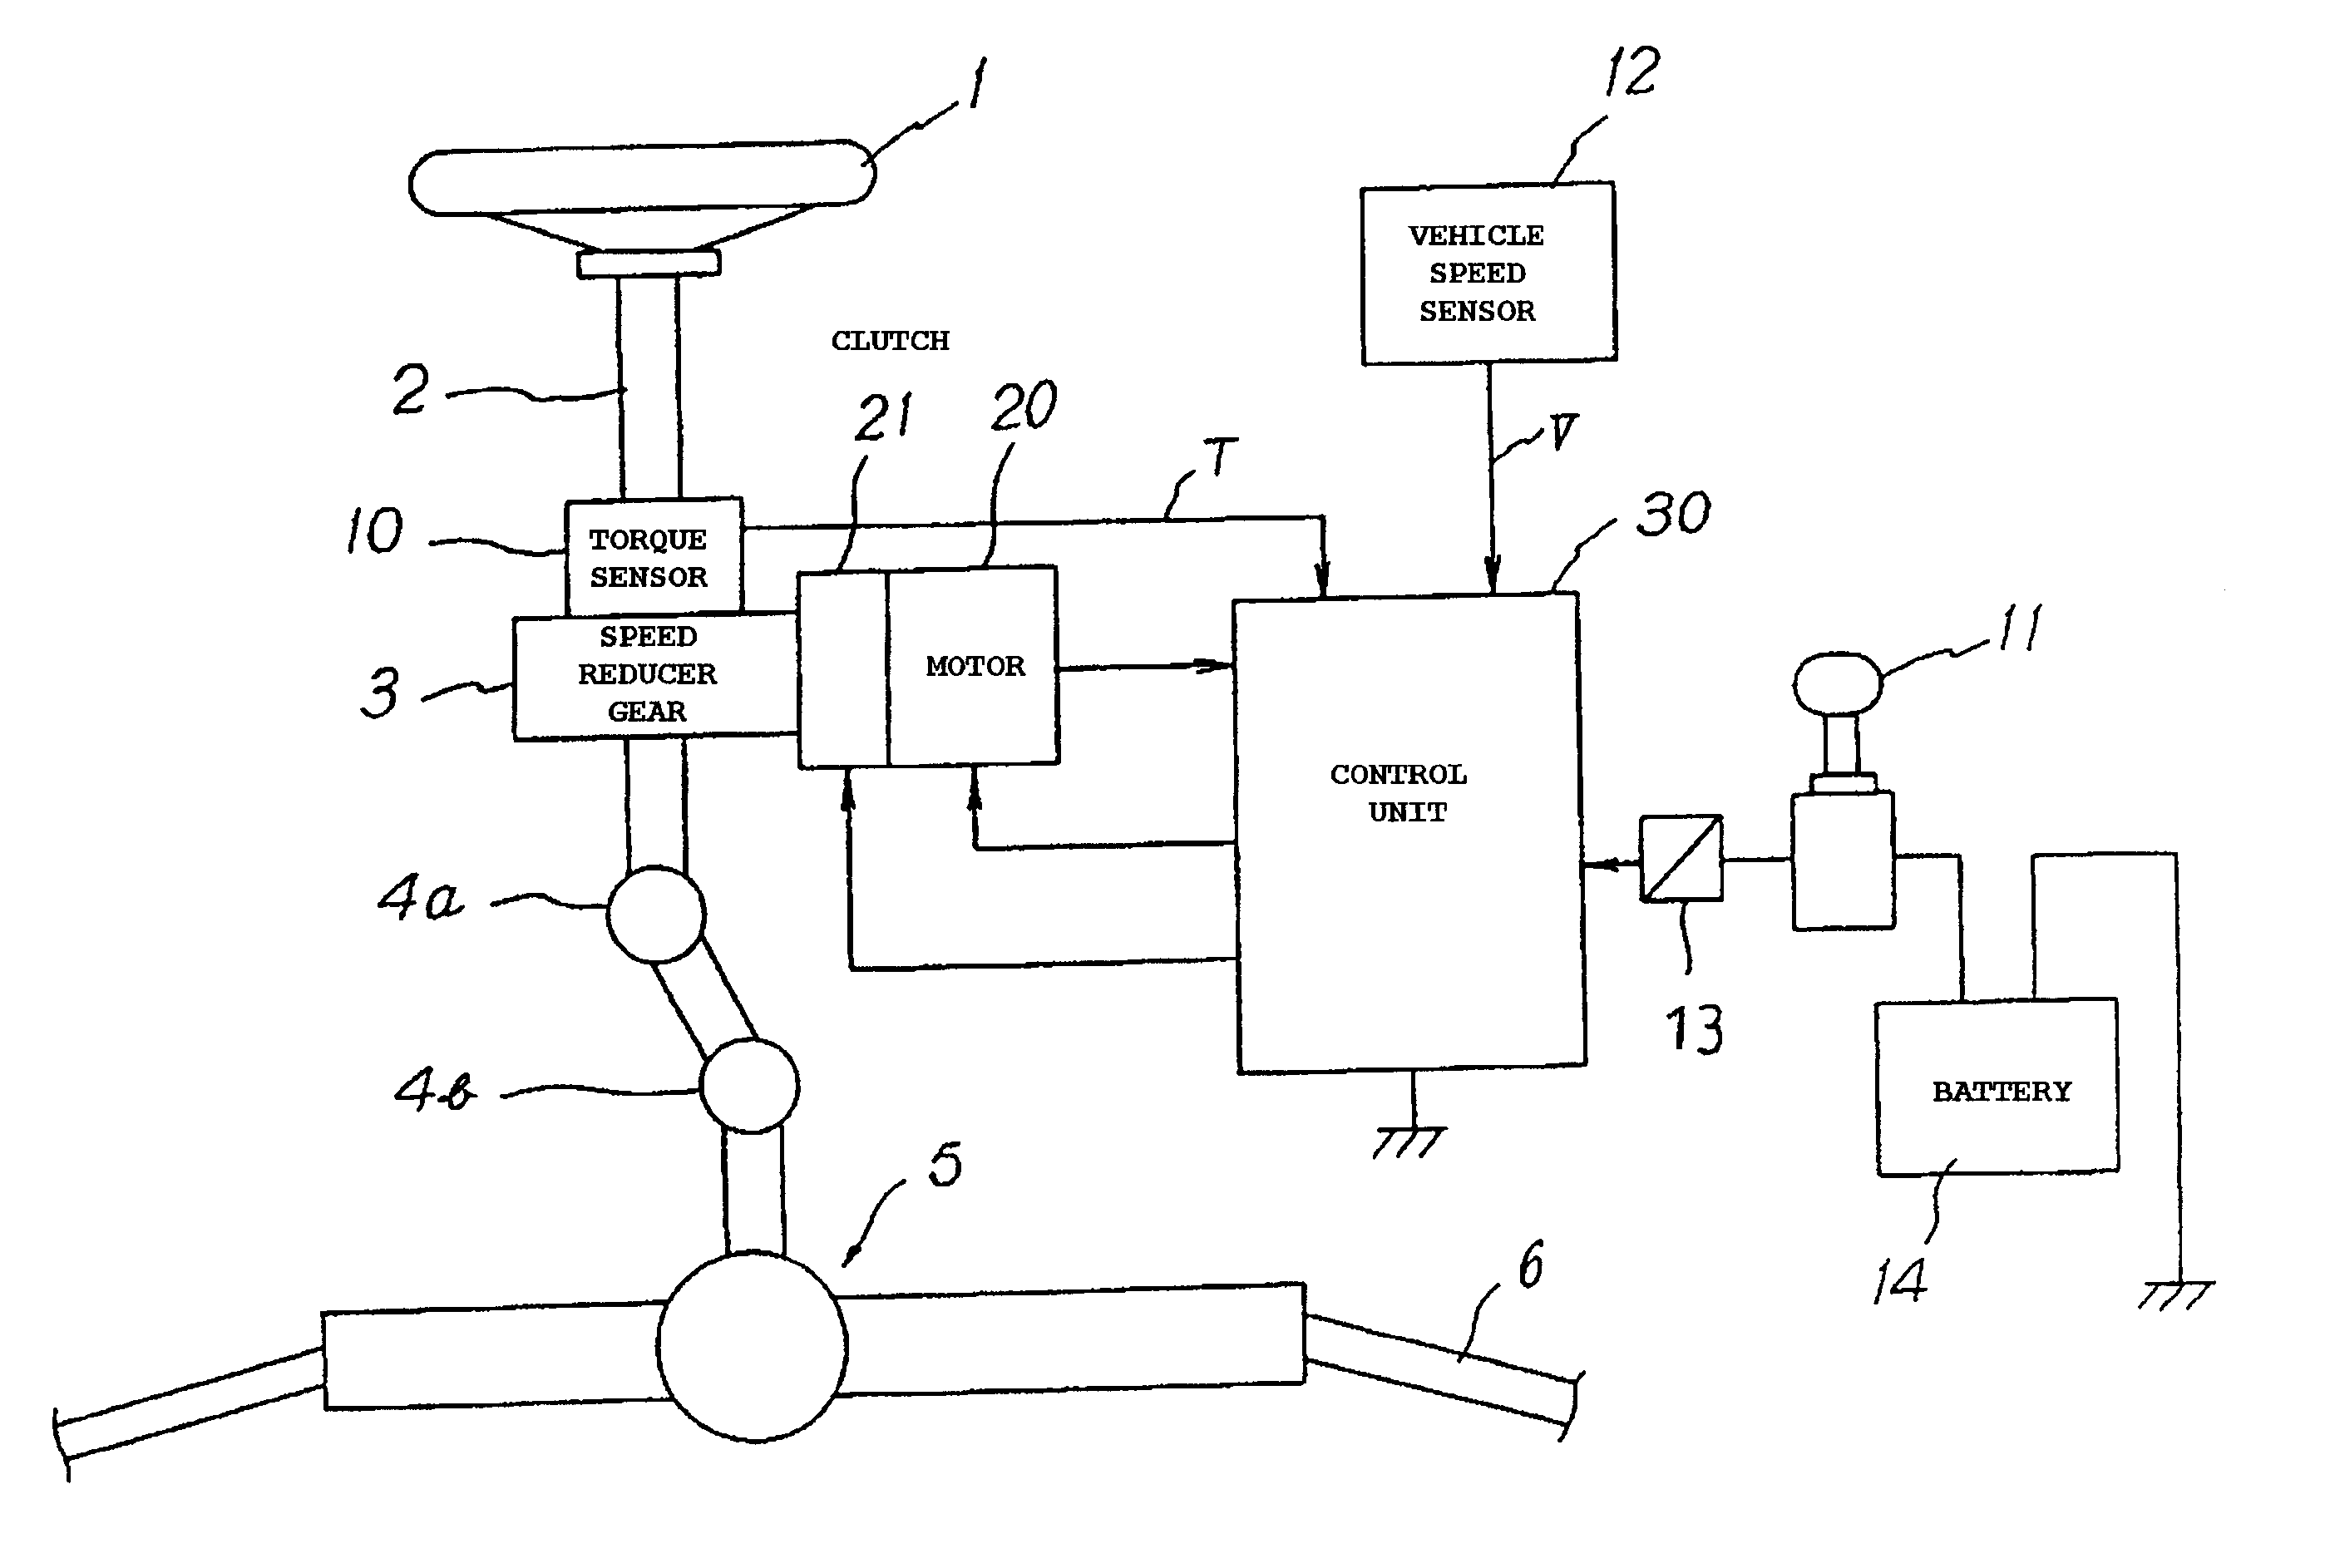 Control apparatus for an electrical power steering apparatus